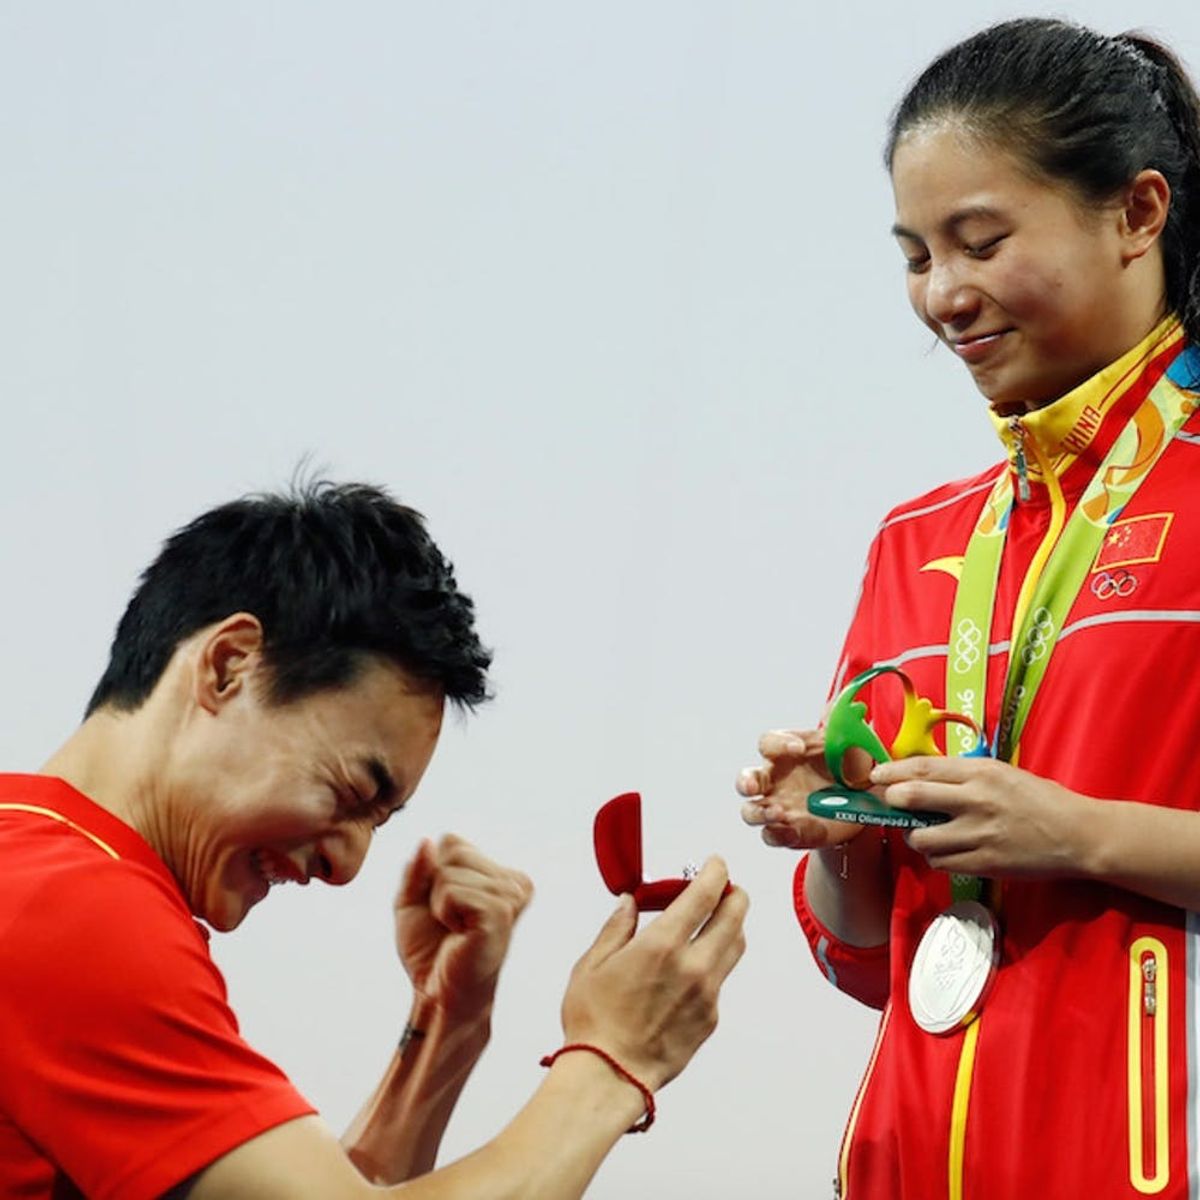 Morning Buzz! This Olympian Got Engaged After Winning a Silver Medal + More